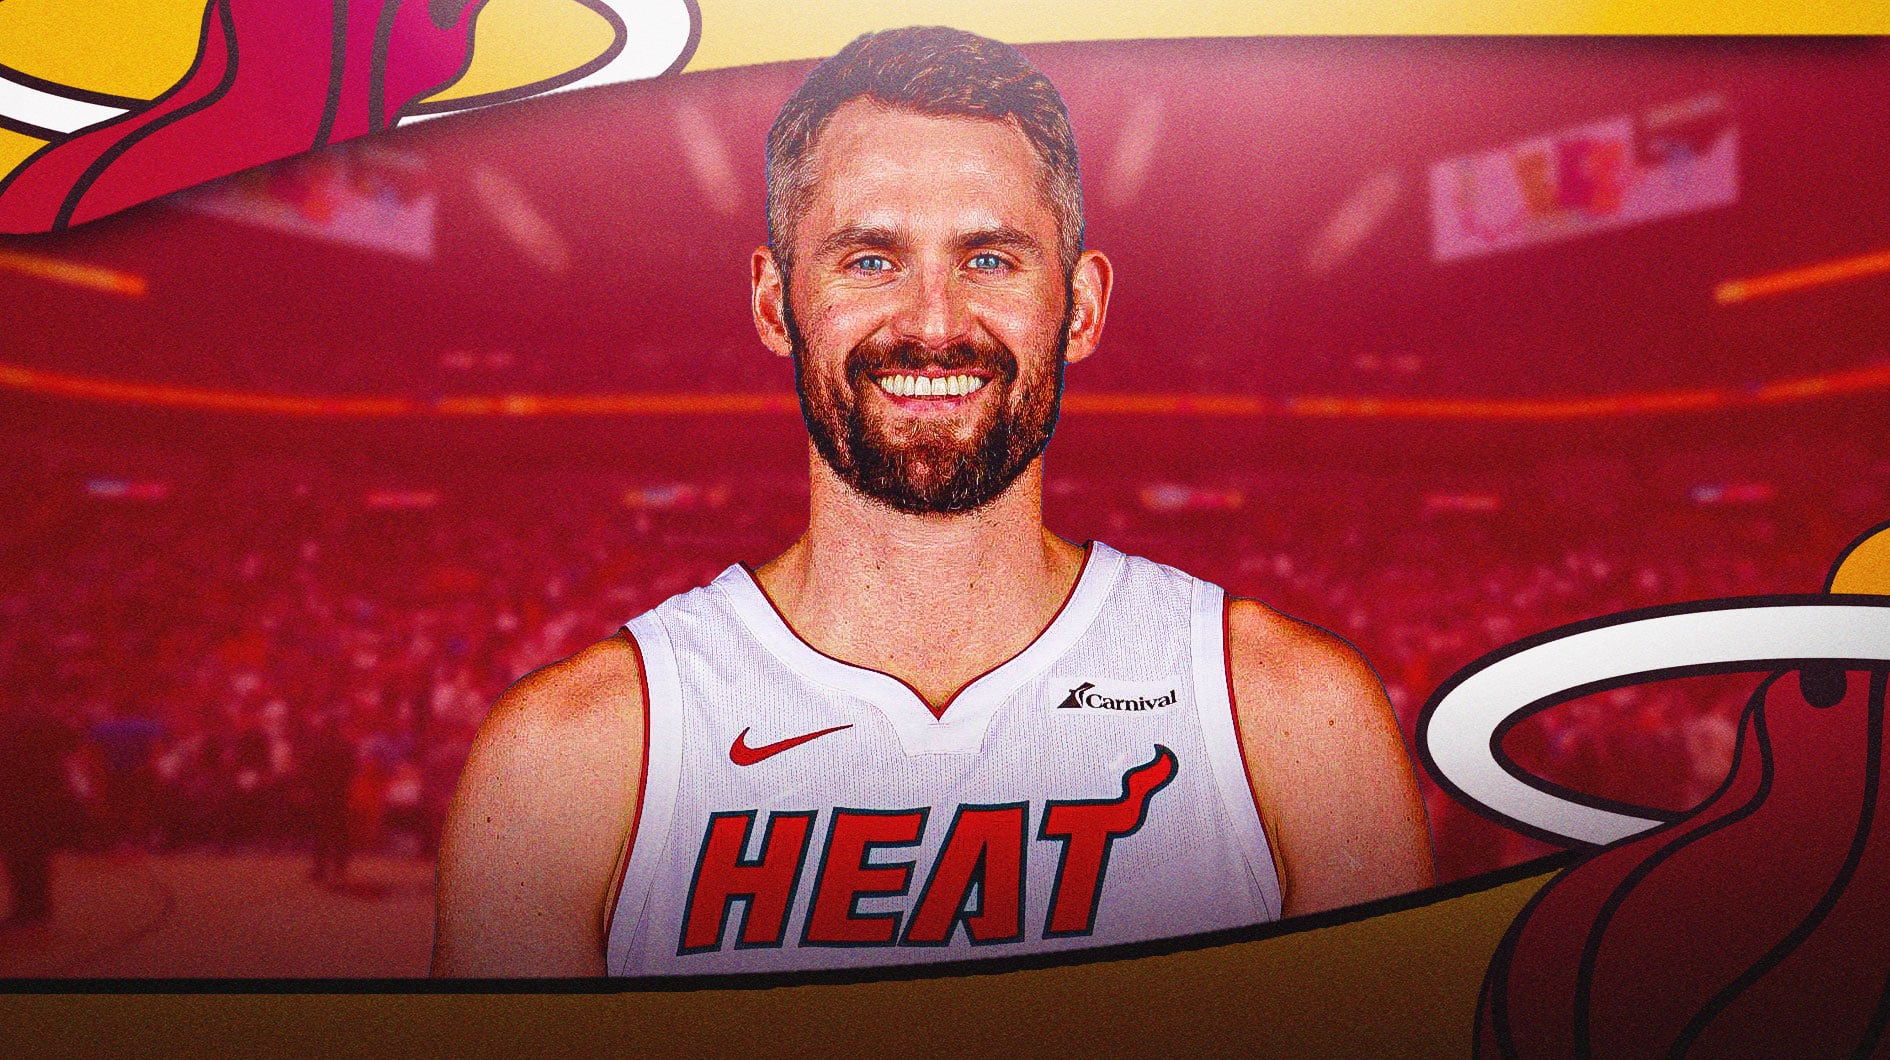 Kevin Love with the Heat arena in the background injury